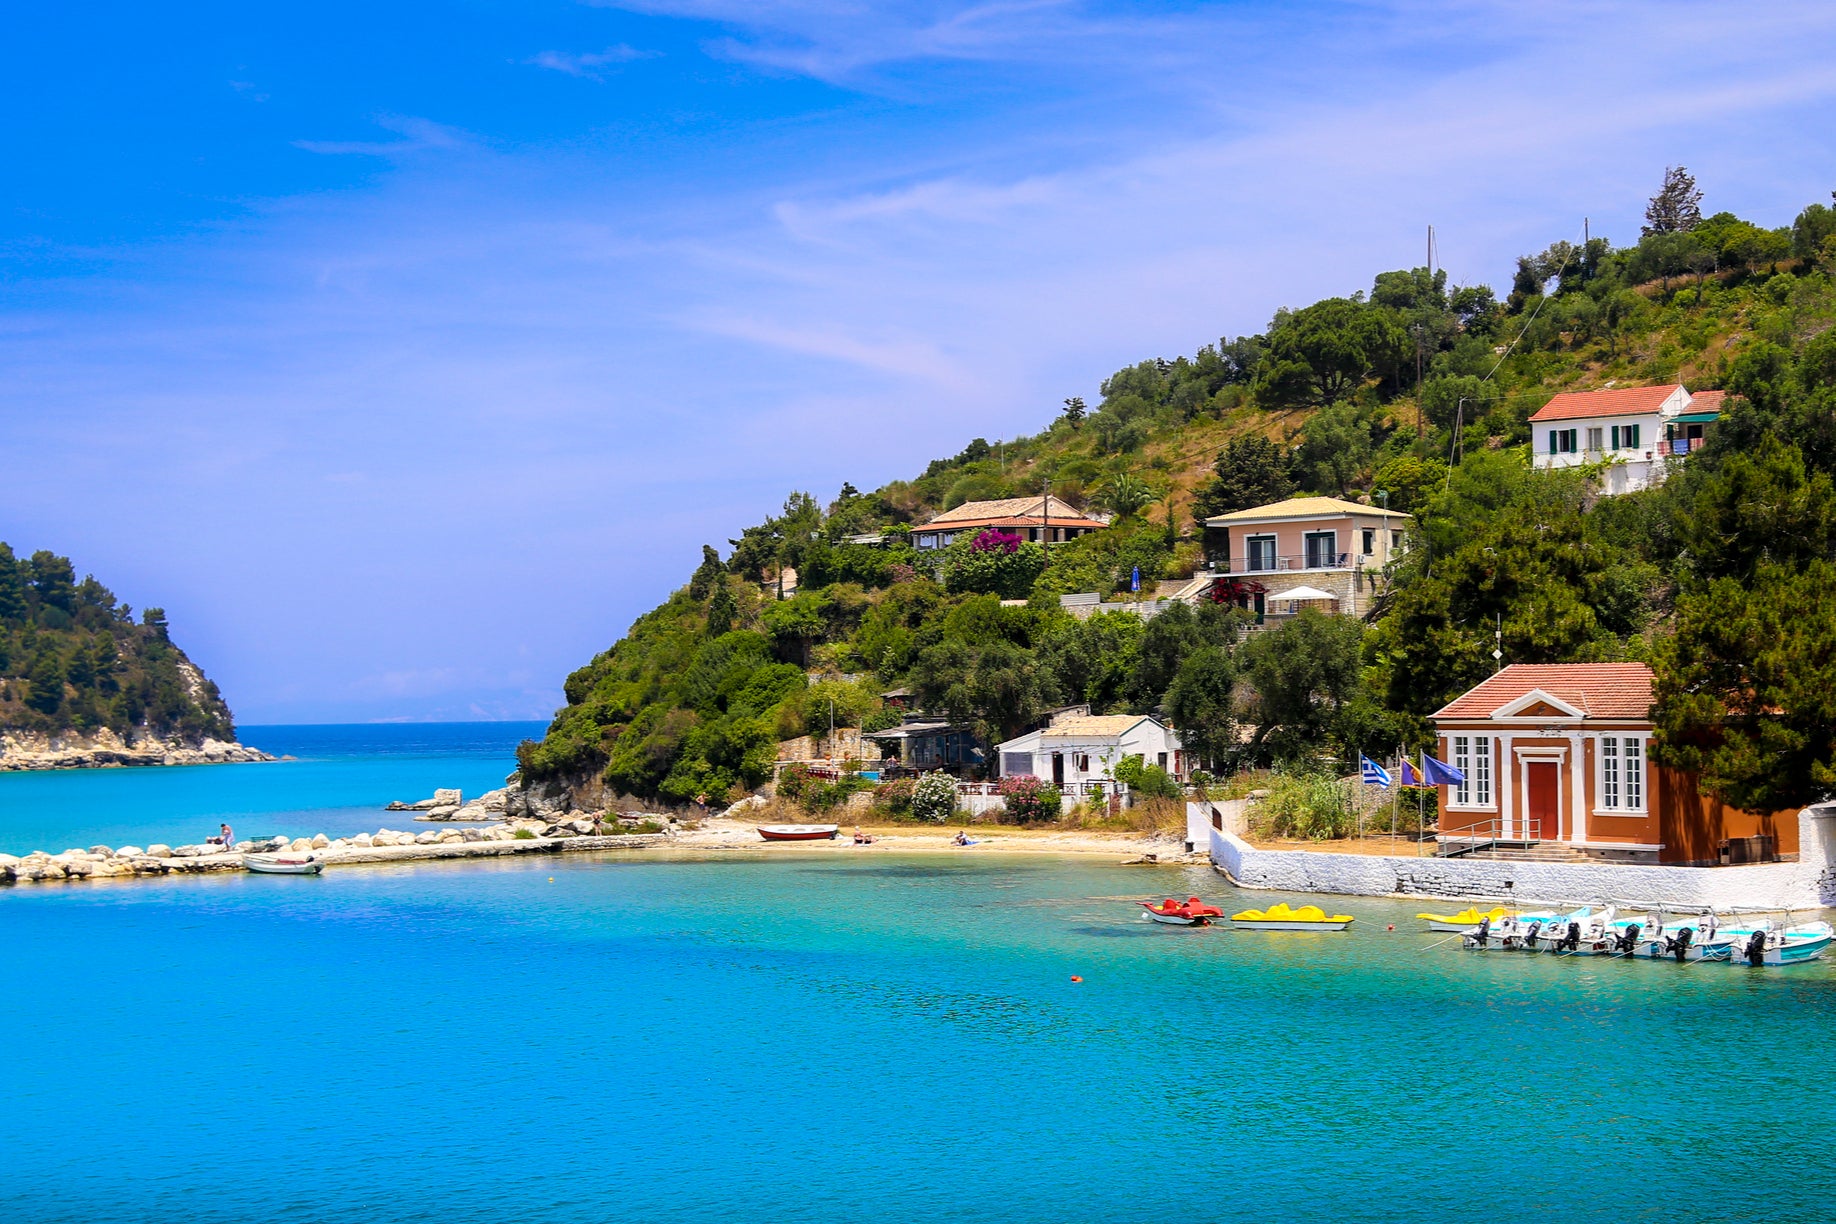 Paxos is perfect for sun-drenched stays on the Ionian